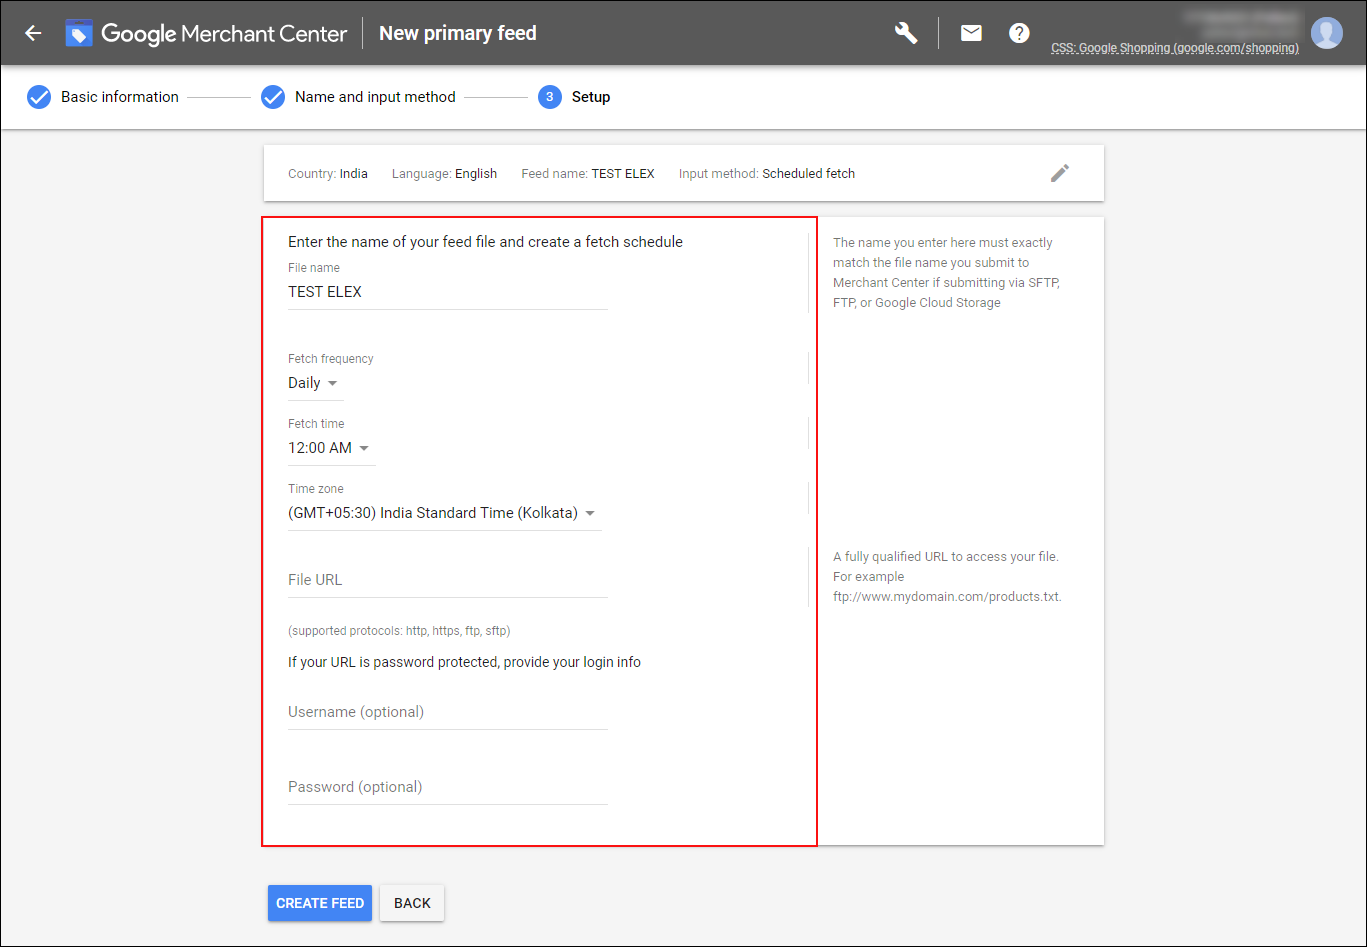  How to Submit your Google Product Feeds Via Scheduled Fetches in Google Merchant Center? | Create fetch schedule